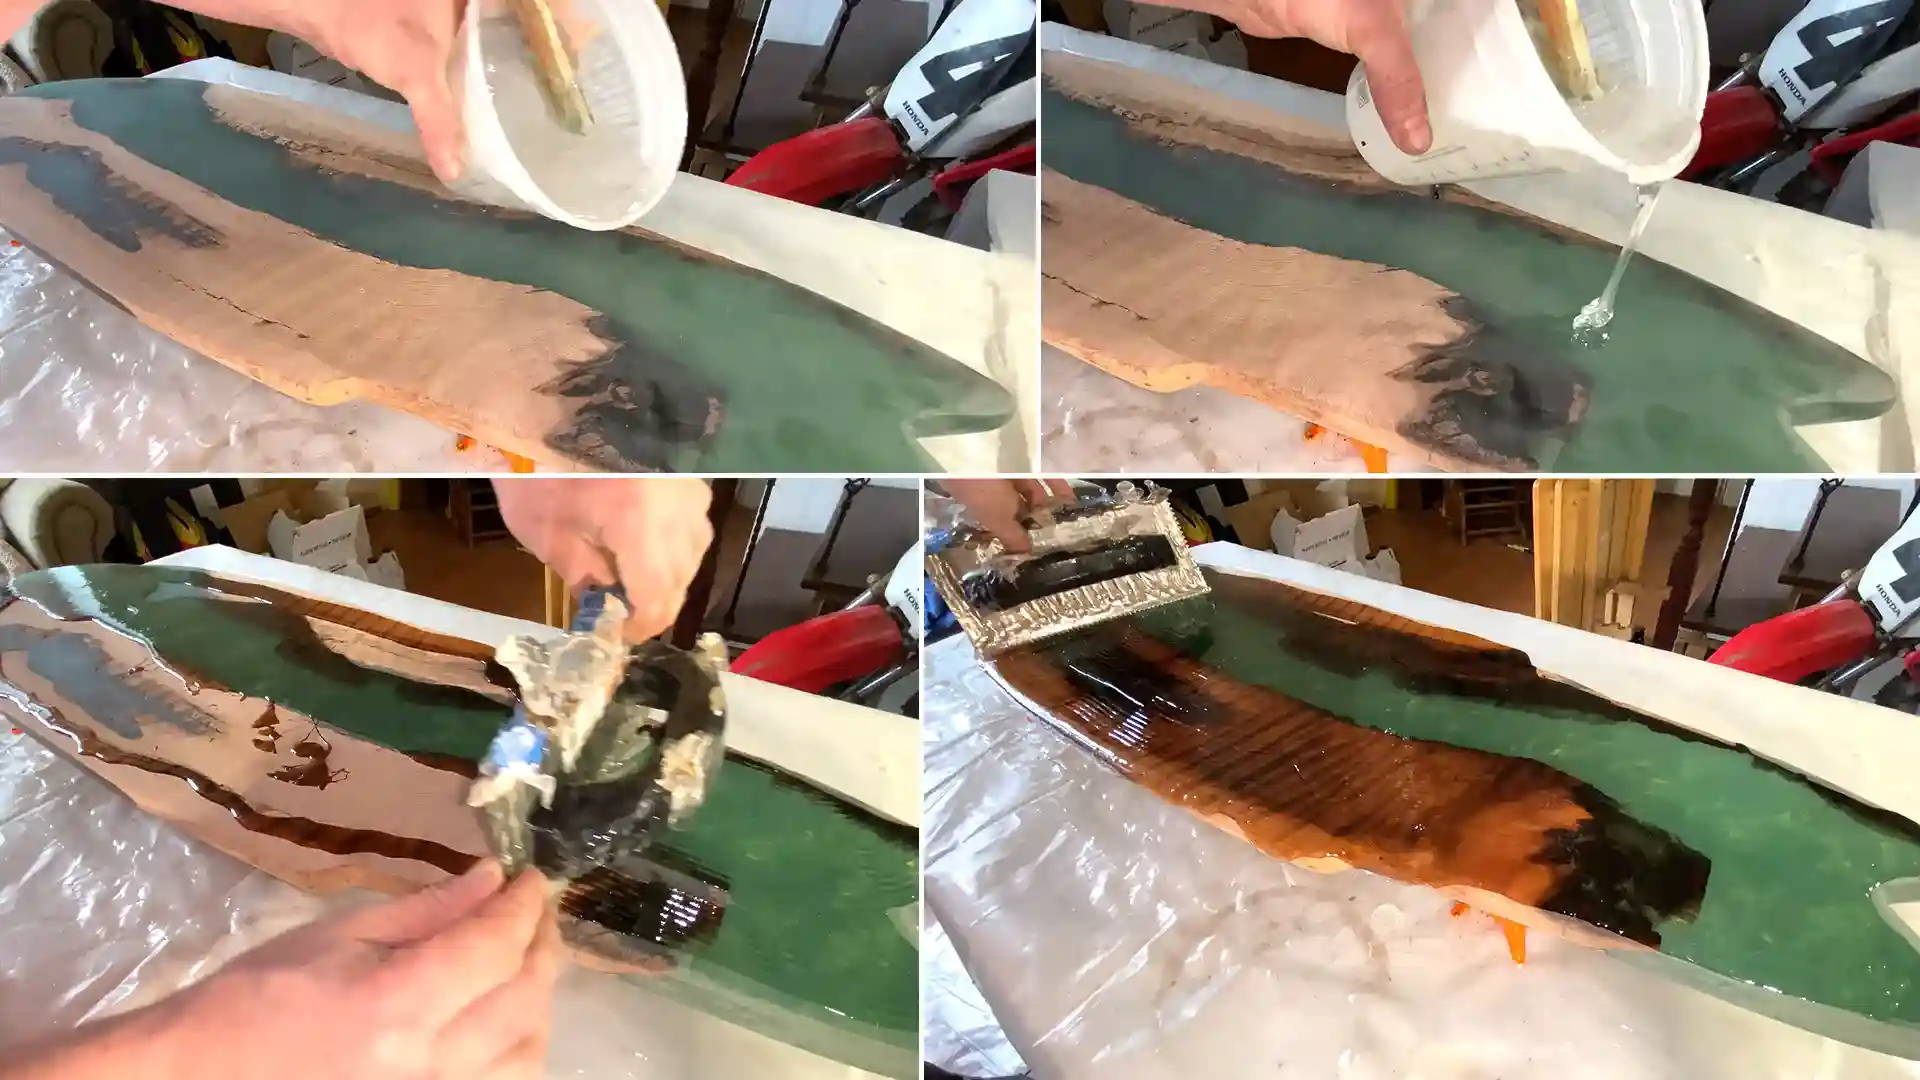 Prepare the clear coat by mixing 3 ounces per square foot of Stone Coat Countertop Epoxy at a 1:1 ratio using a drill and mixing paddle.